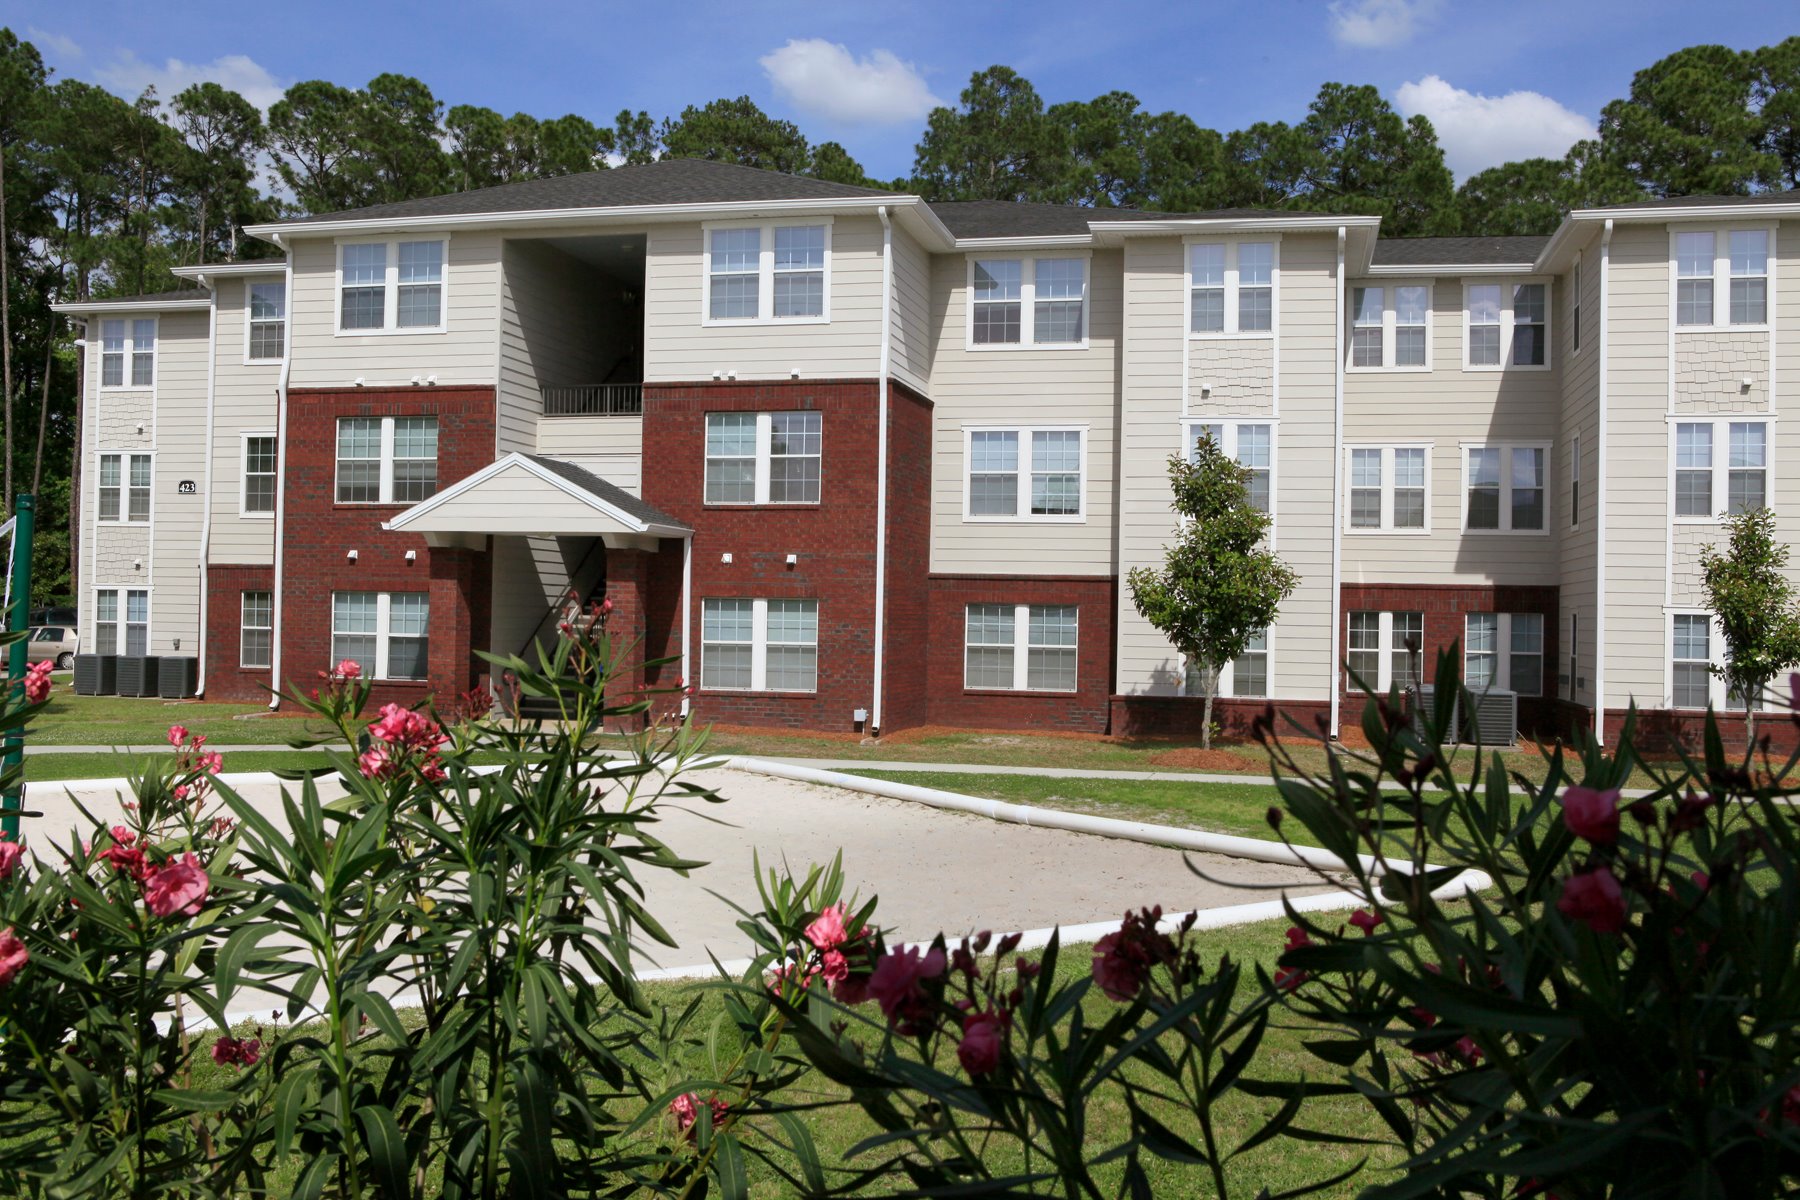 Tiger Bay Court Apartment Homes